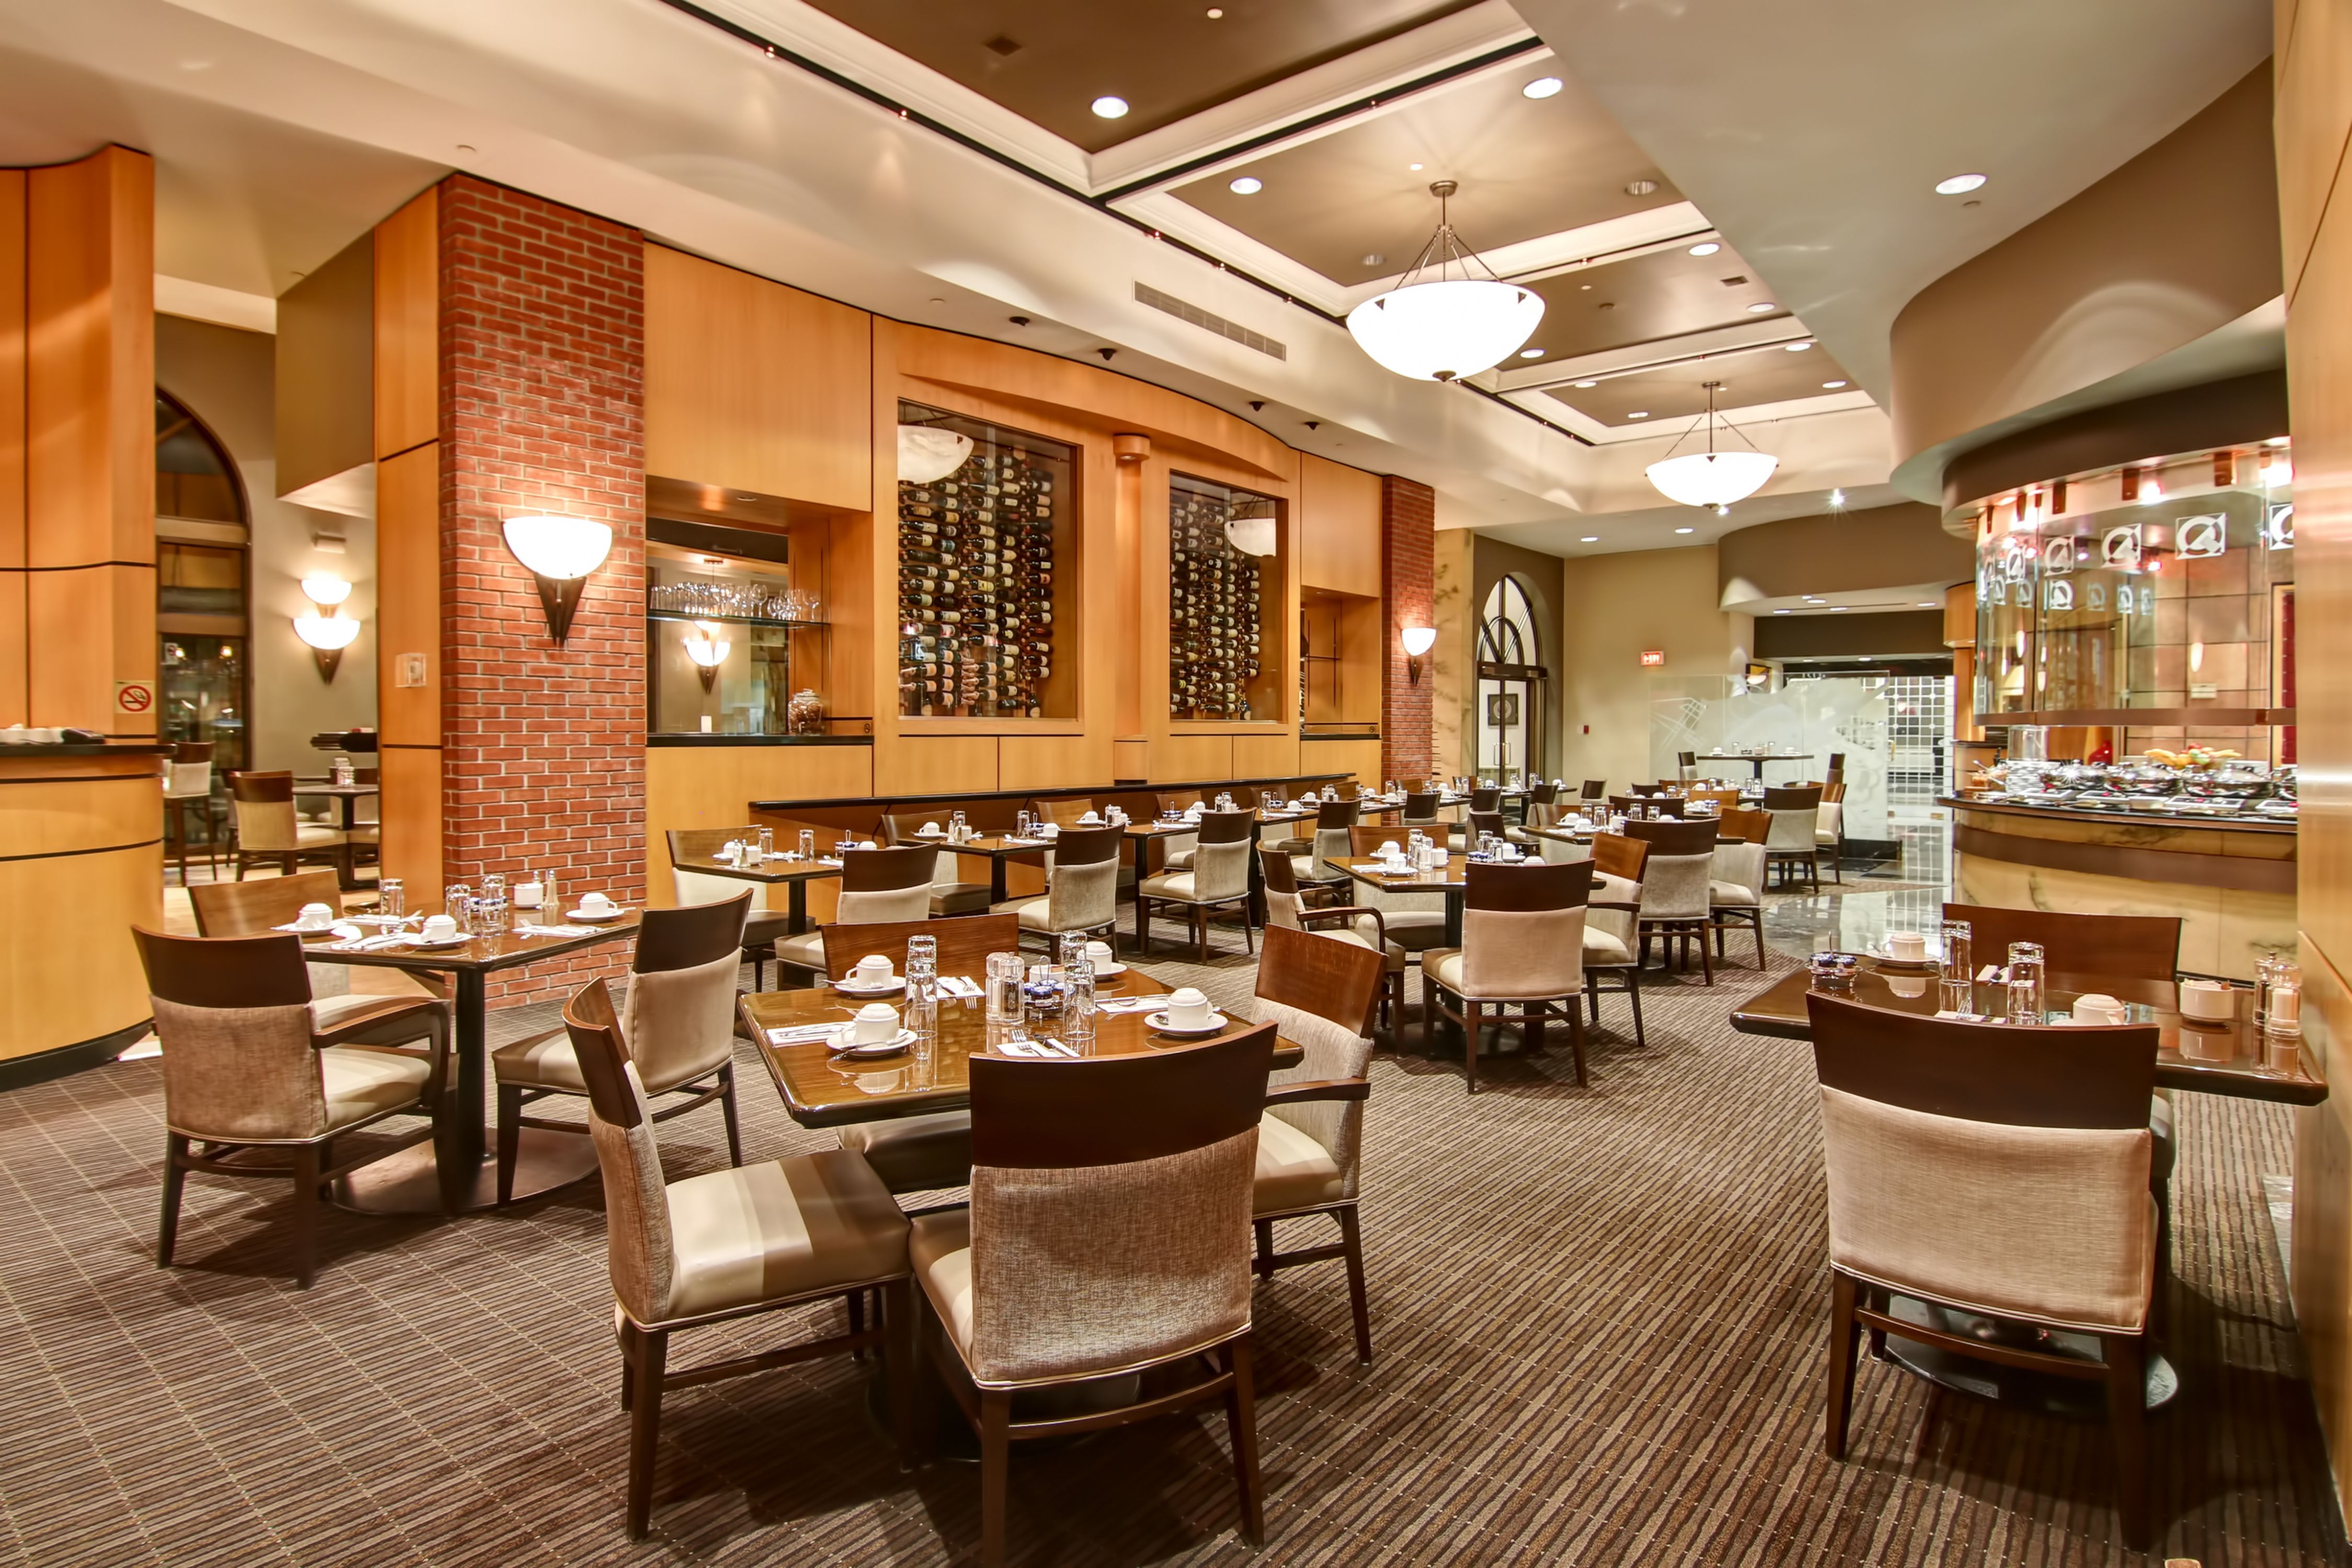 Spacious Restaurant Dining Area with Seats and Tables